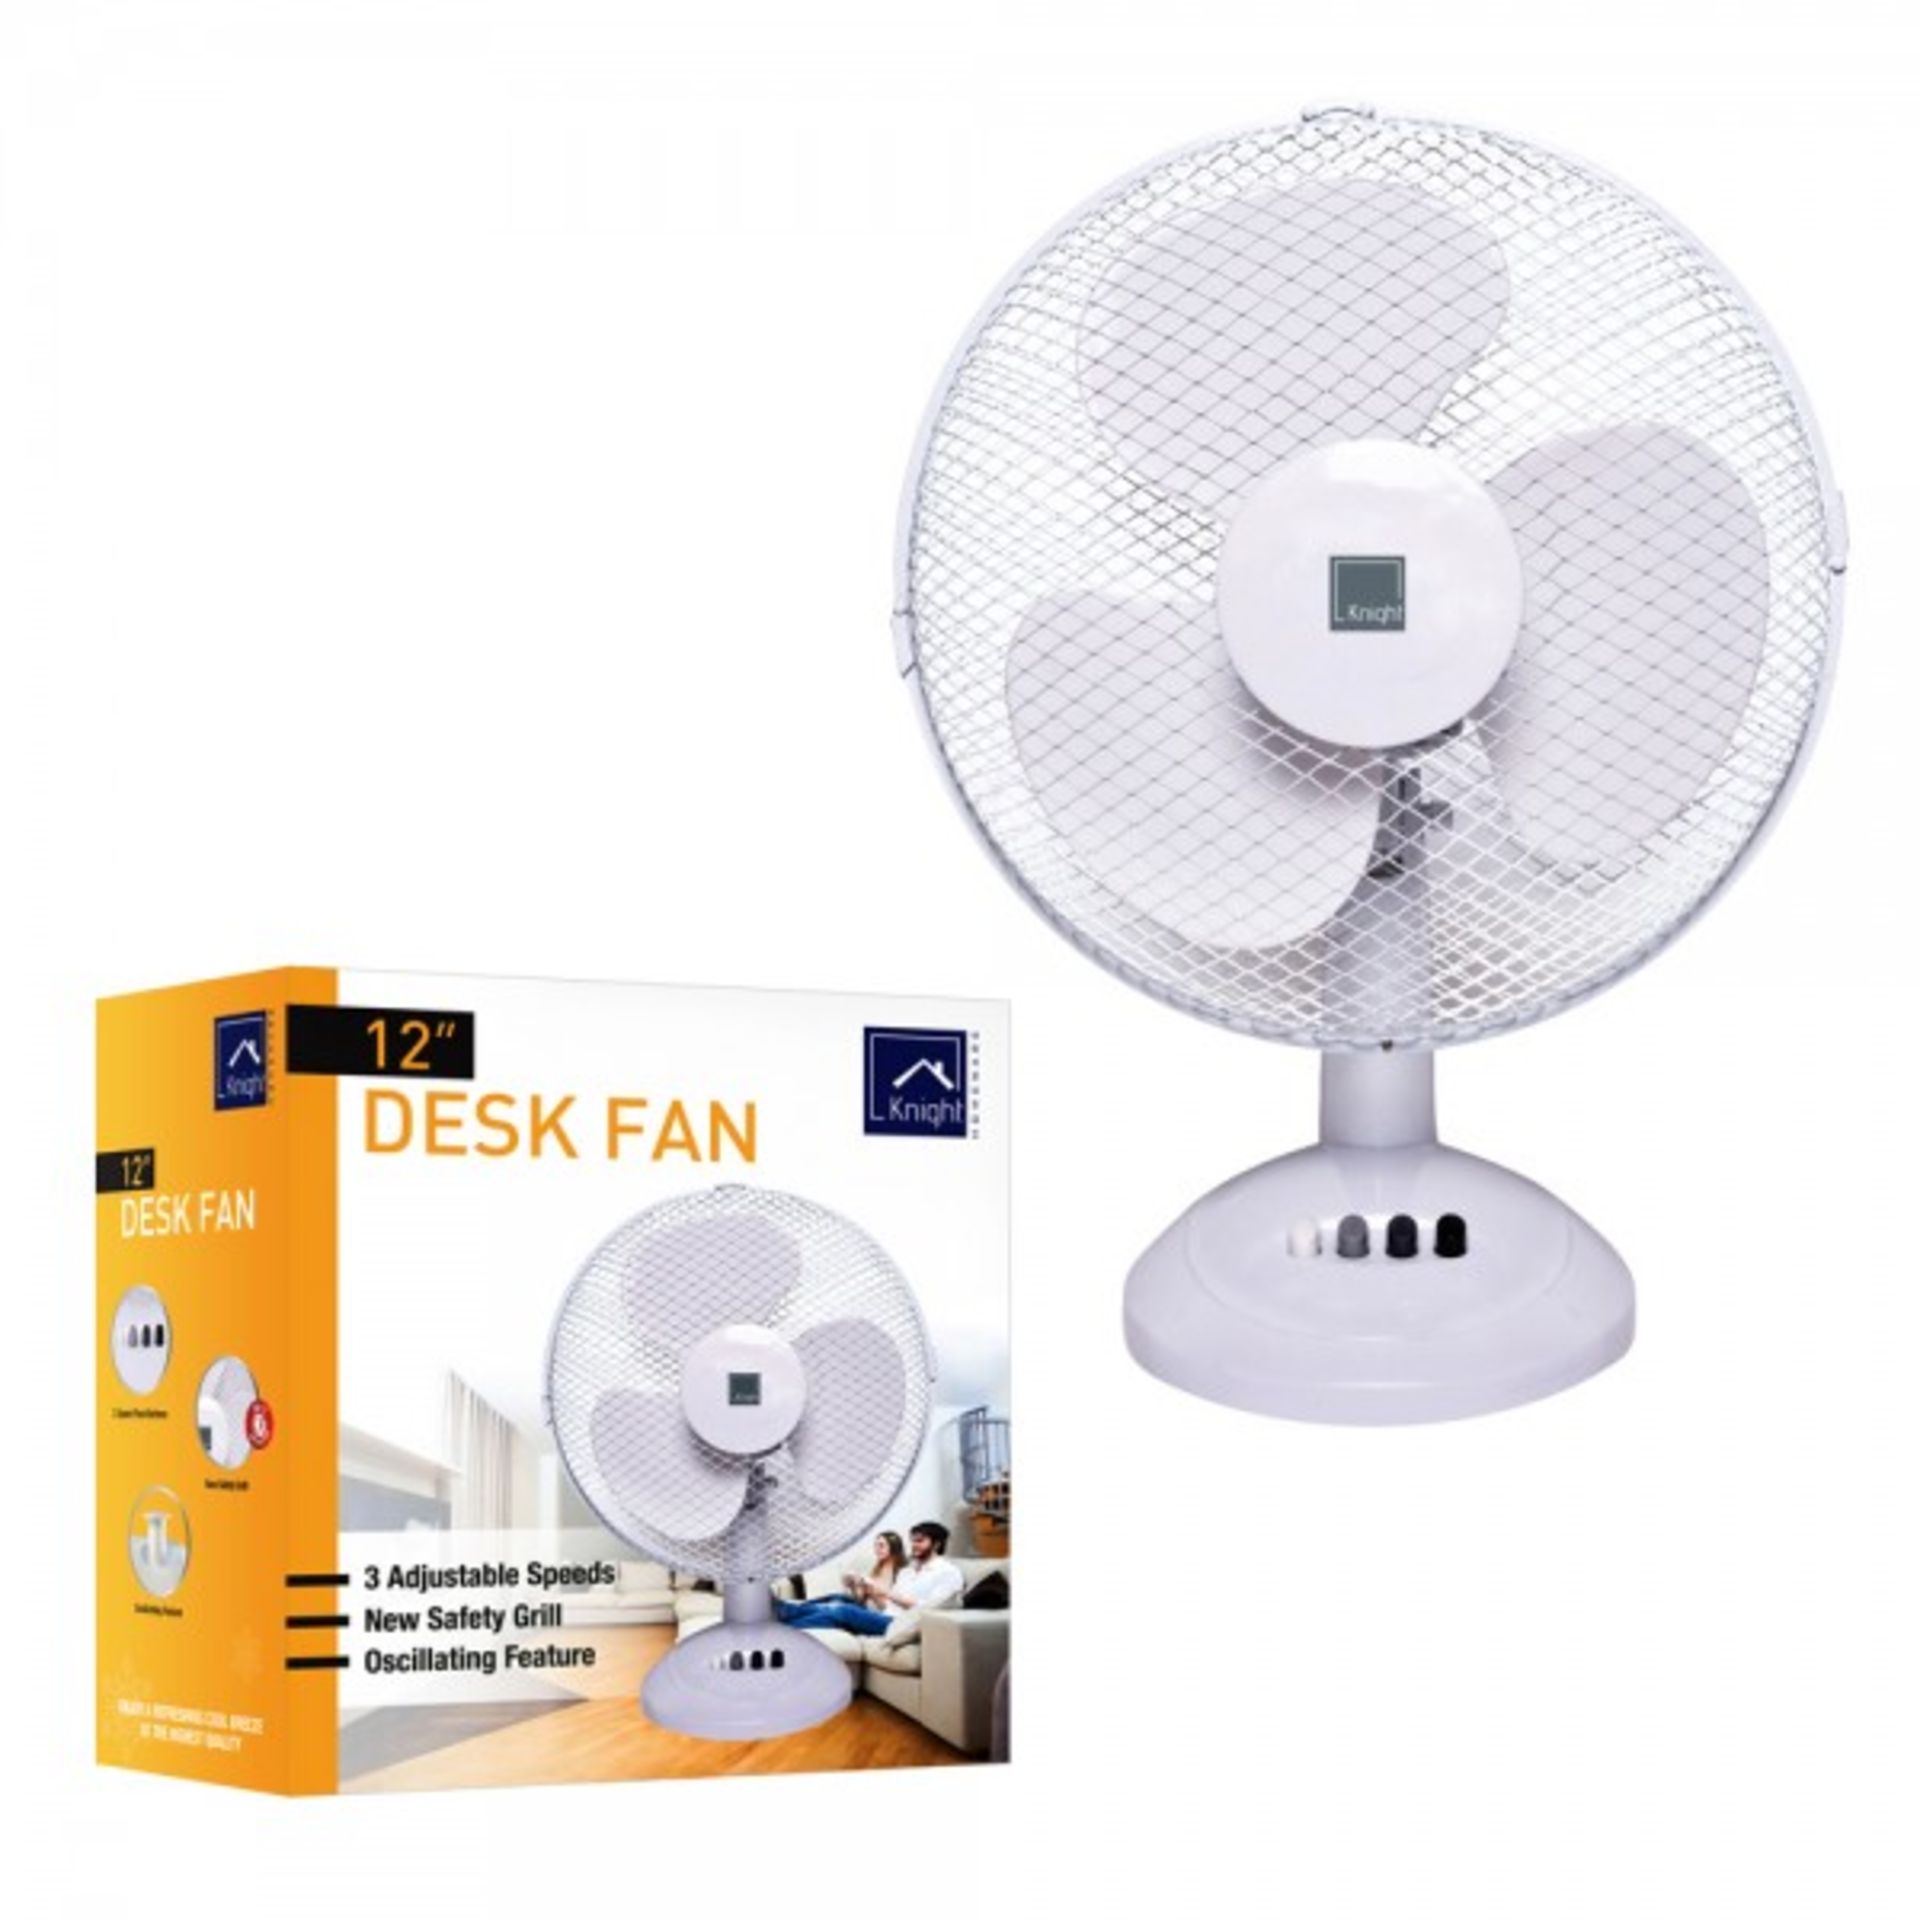 V *TRADE QTY* Brand New 12" Desk Top Oscillating Three Speed Fan X 3 YOUR BID PRICE TO BE MULTIPLIED